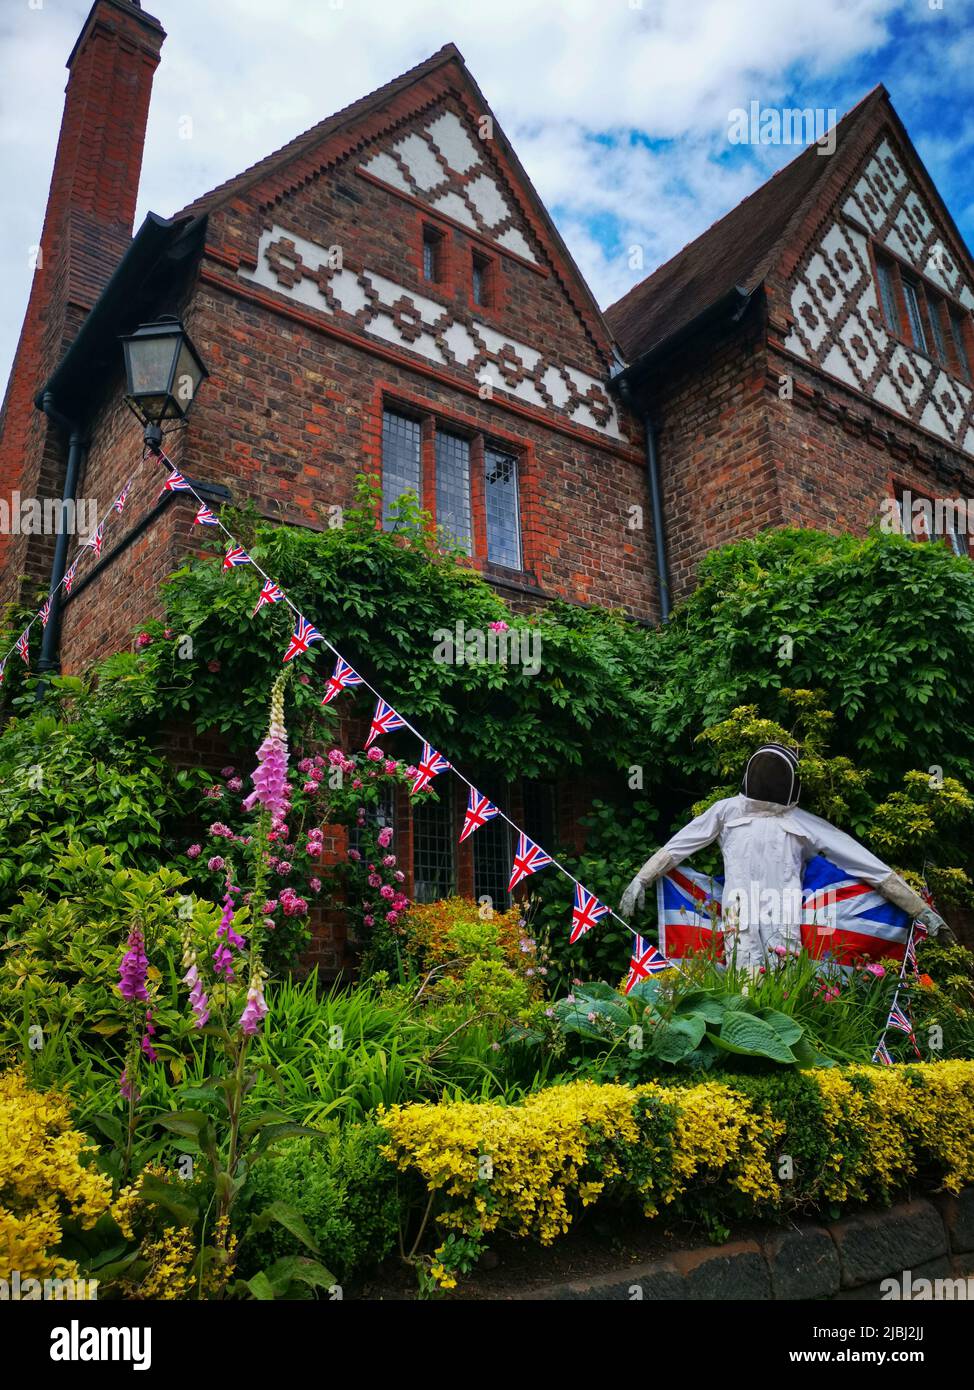 Beekeeper scarecrow in a garden in the village of Great Budworth, Cheshire during the platinum jubilee. Stock Photo